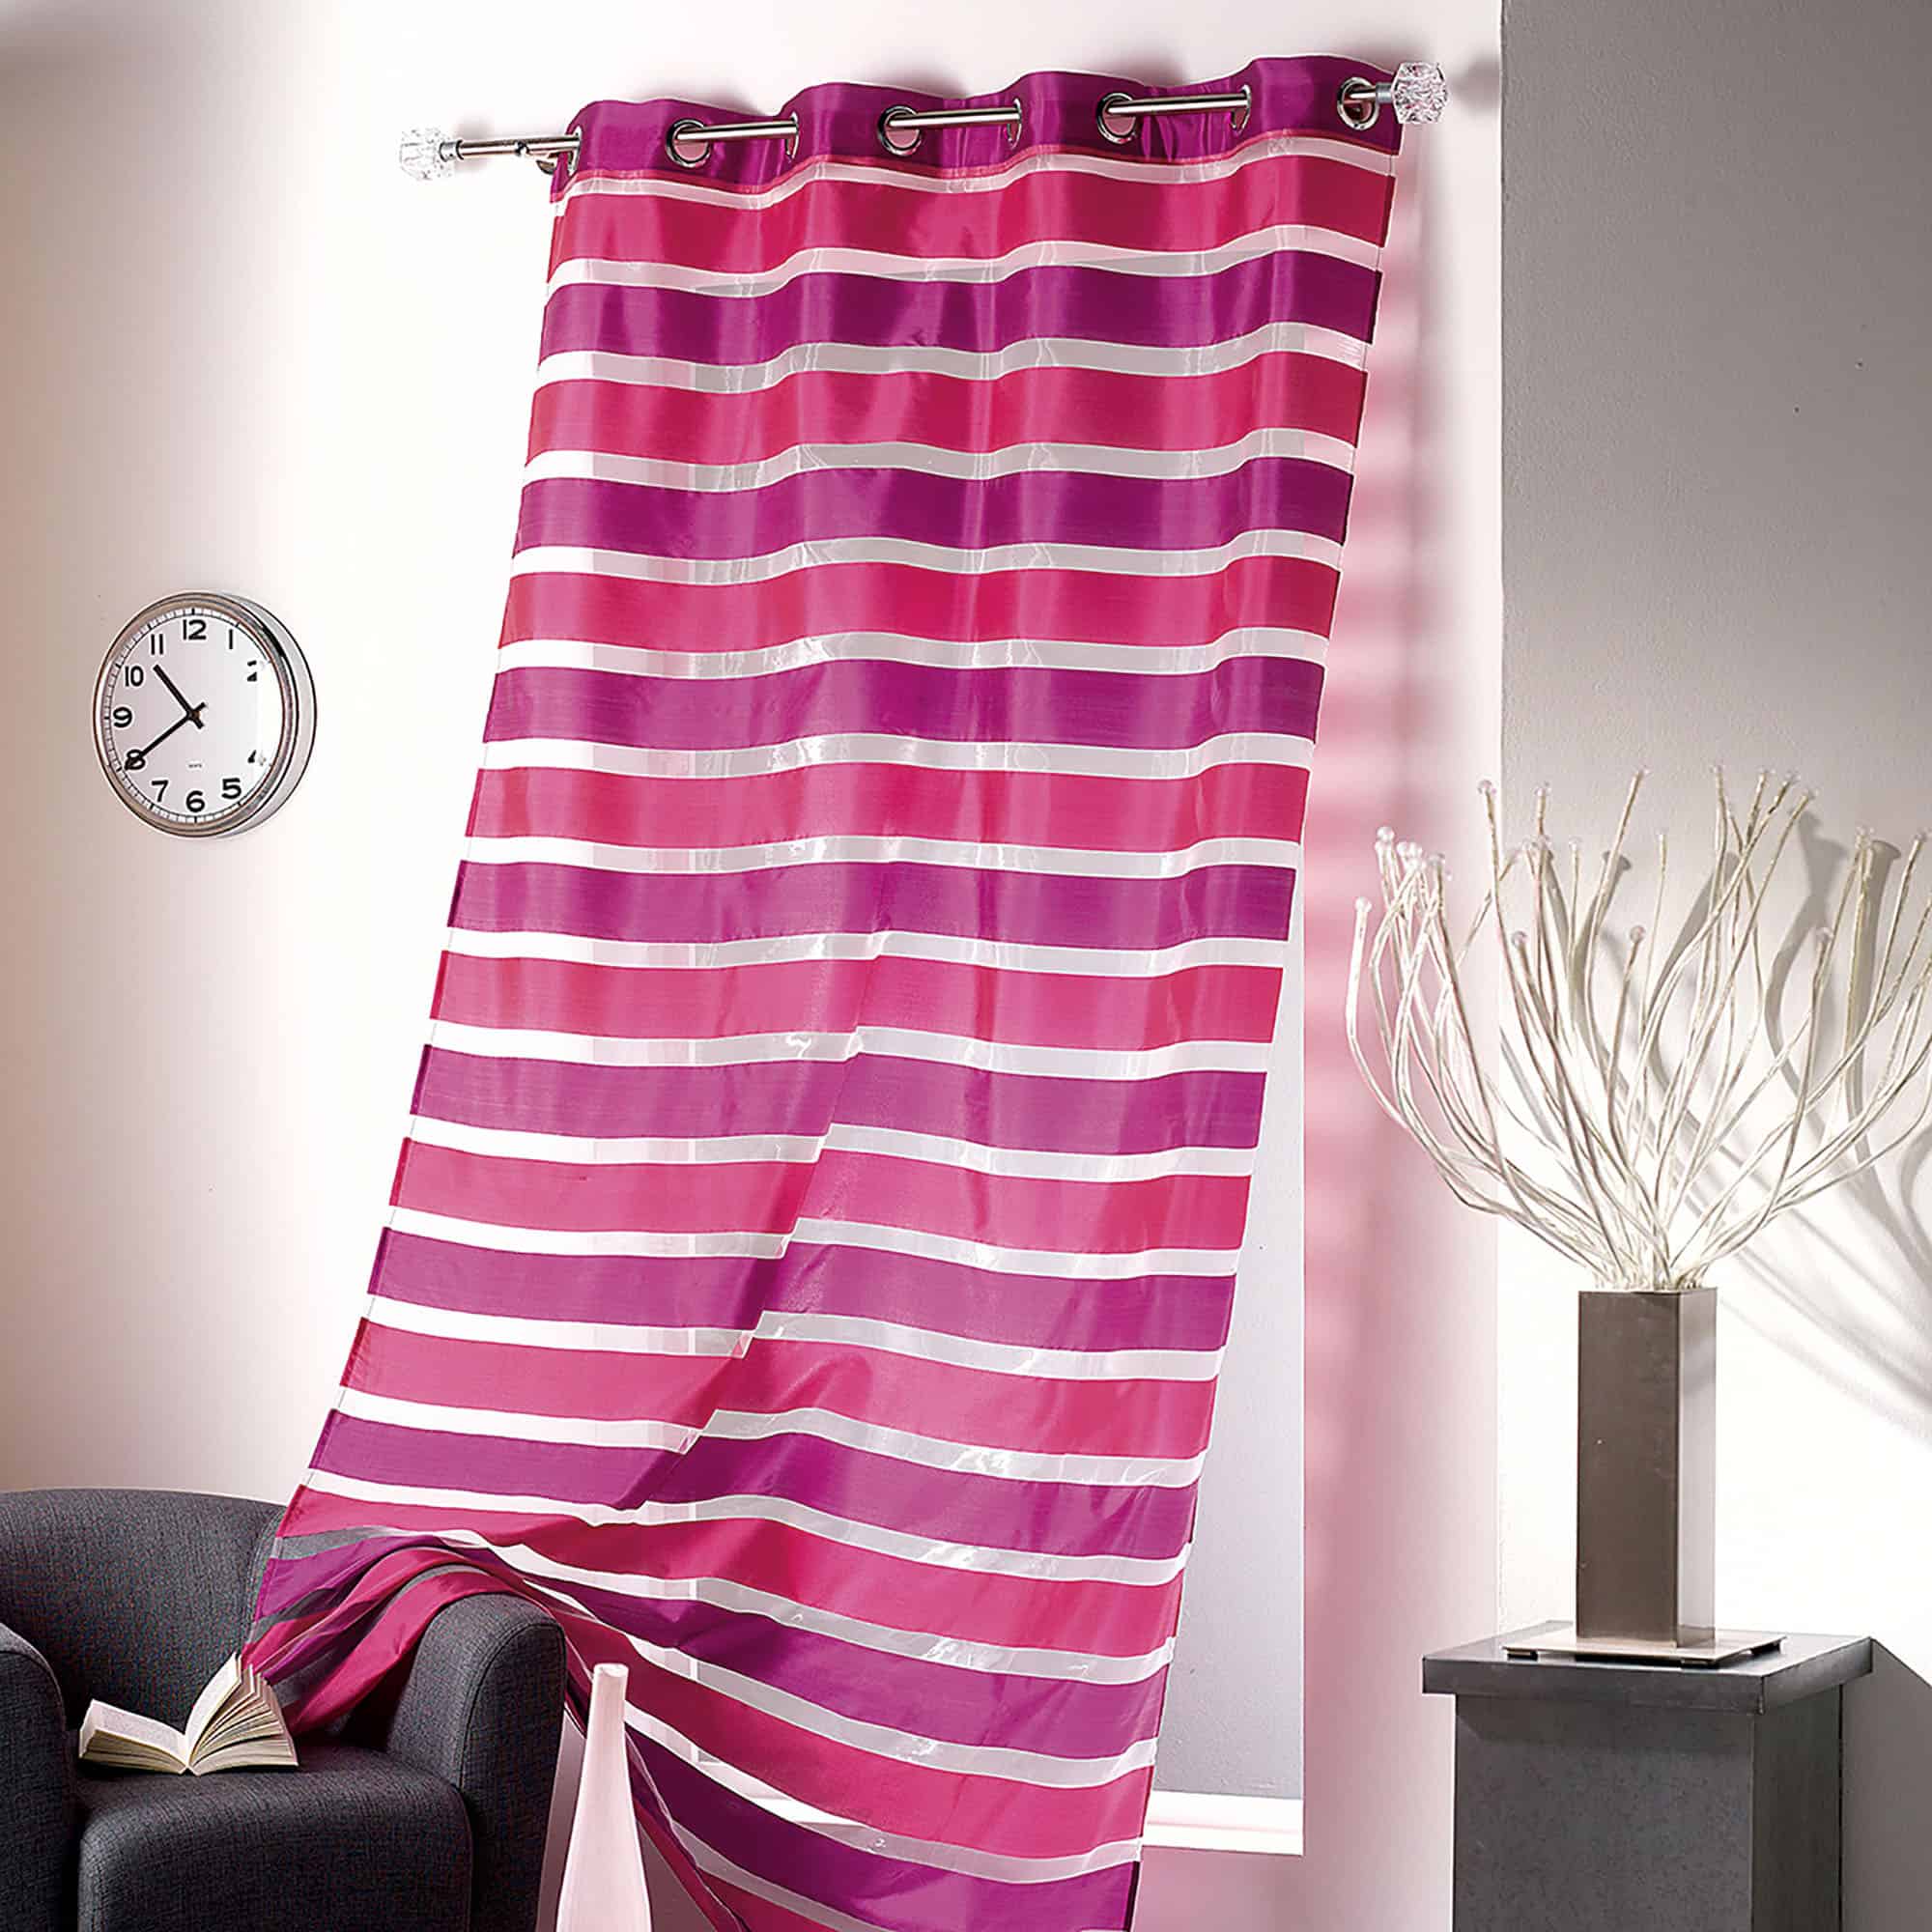 bicolor hot pink fuchsia organza striped sheer curtain panel 1 piece for large window